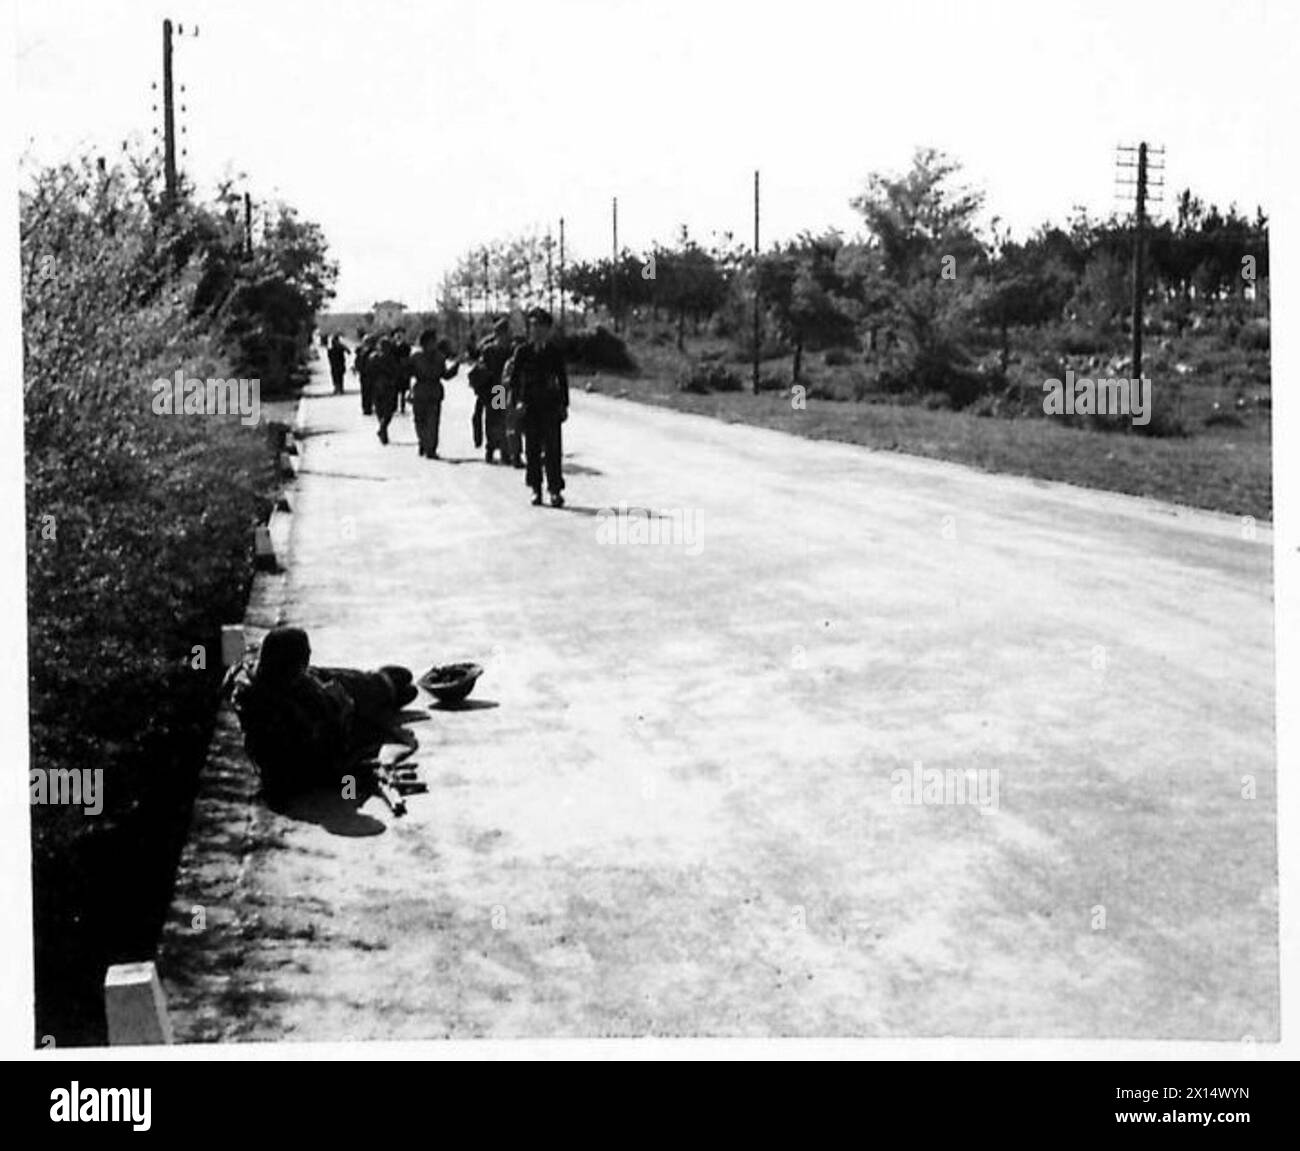 EIGHTH ARMY : ADVANCE TO TRIESTE - The Germans come along the road to give themselves up, bringing the three Naval officers with them. In the road, to the right, lies a New Zealander whose leg was broken when the Germans opened fire down the road. The Naval officers were:- Captain Dickenson (British), Senior Naval Officer, Northern Adriatic. Lieut. G.H. Foeller, U.S. Navy, attended staff of S.N.O., N.W. Mediterranean (who was badly wounded), Commander J. Kirstine, U.S. Coast Guard British Army Stock Photo